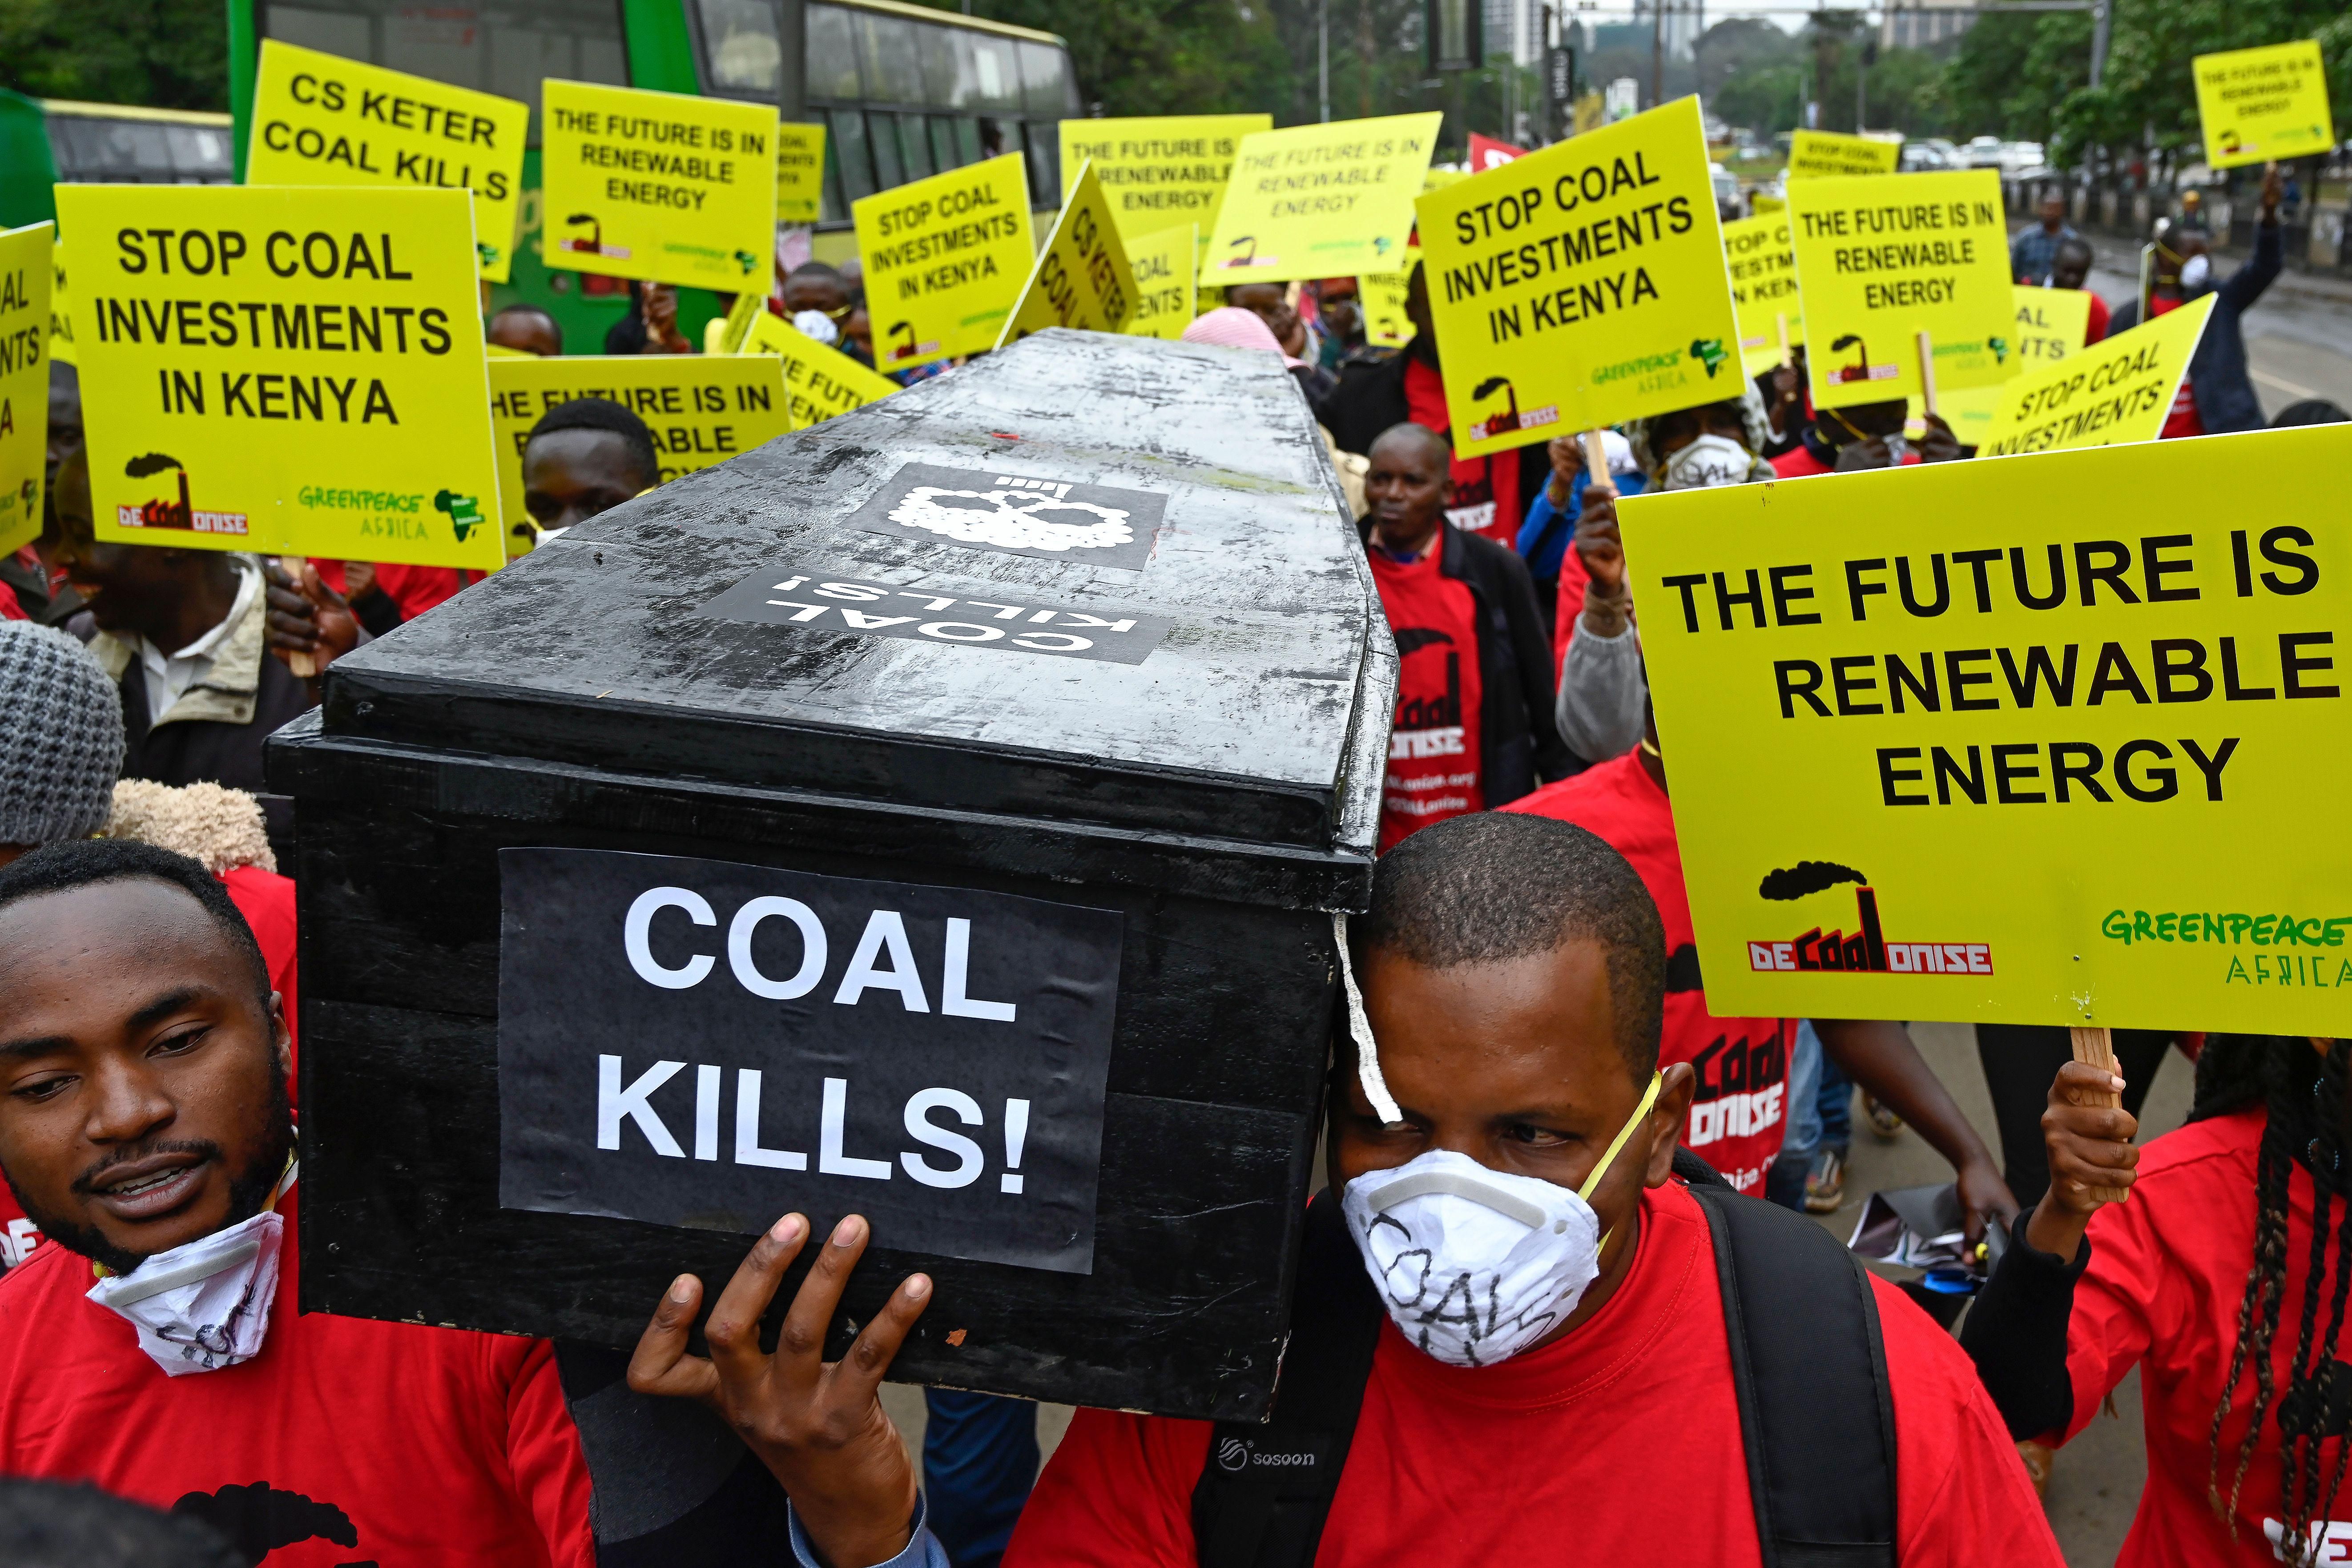 Greenpeace Africa opposes coal projects